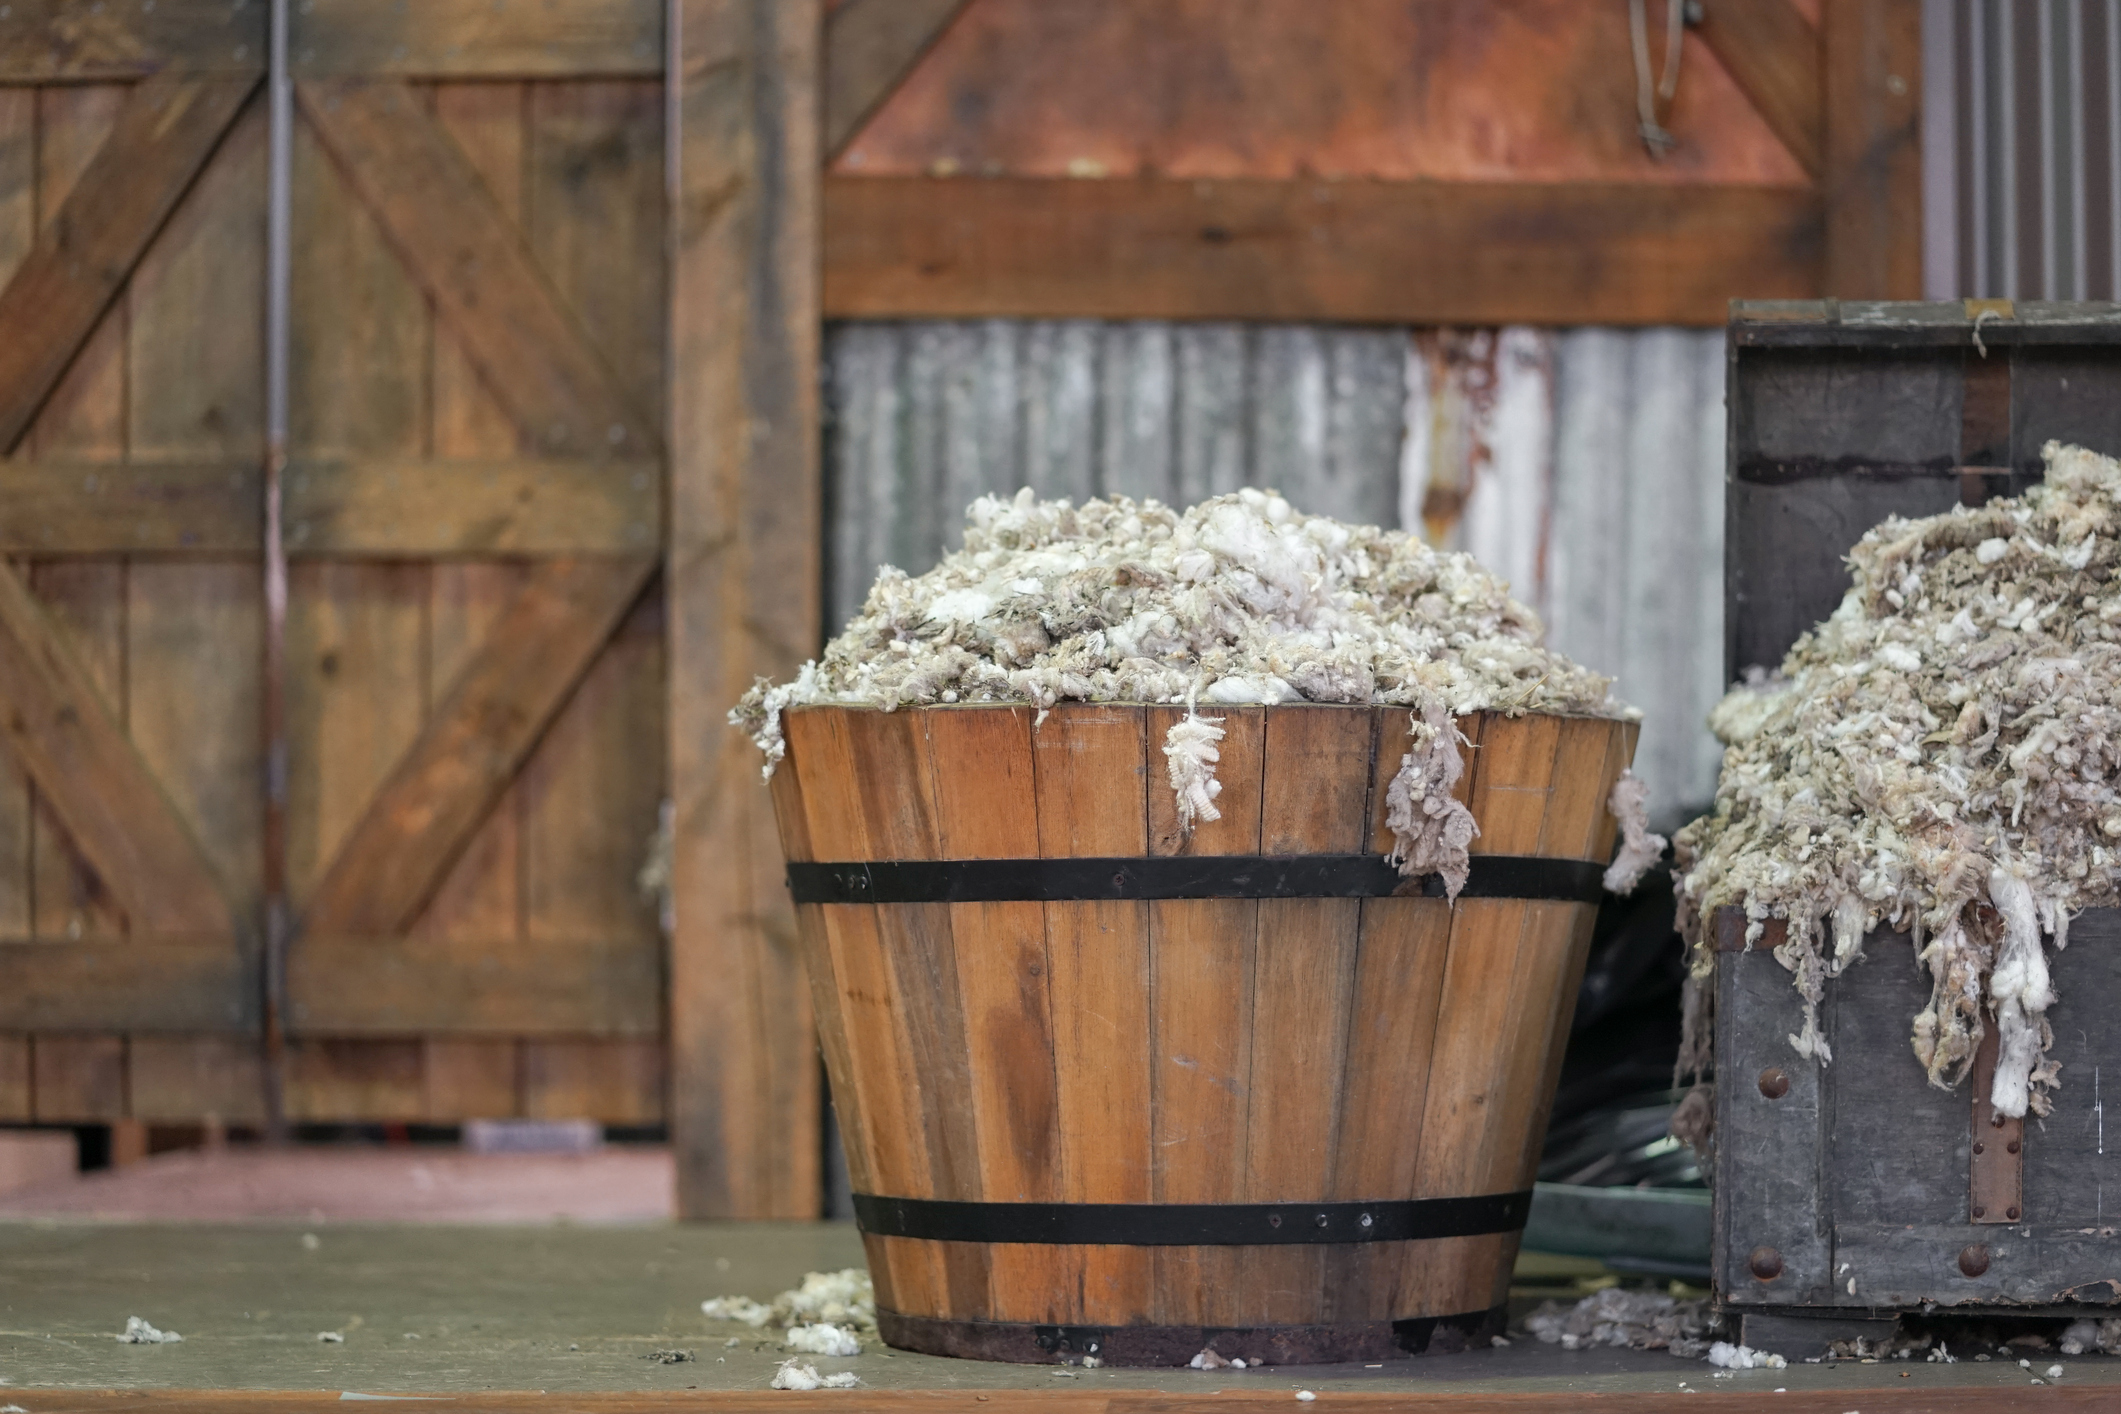 A wooden bucket full of wool after sheep shearing. (Photo: iStock - EnchantedFairy)